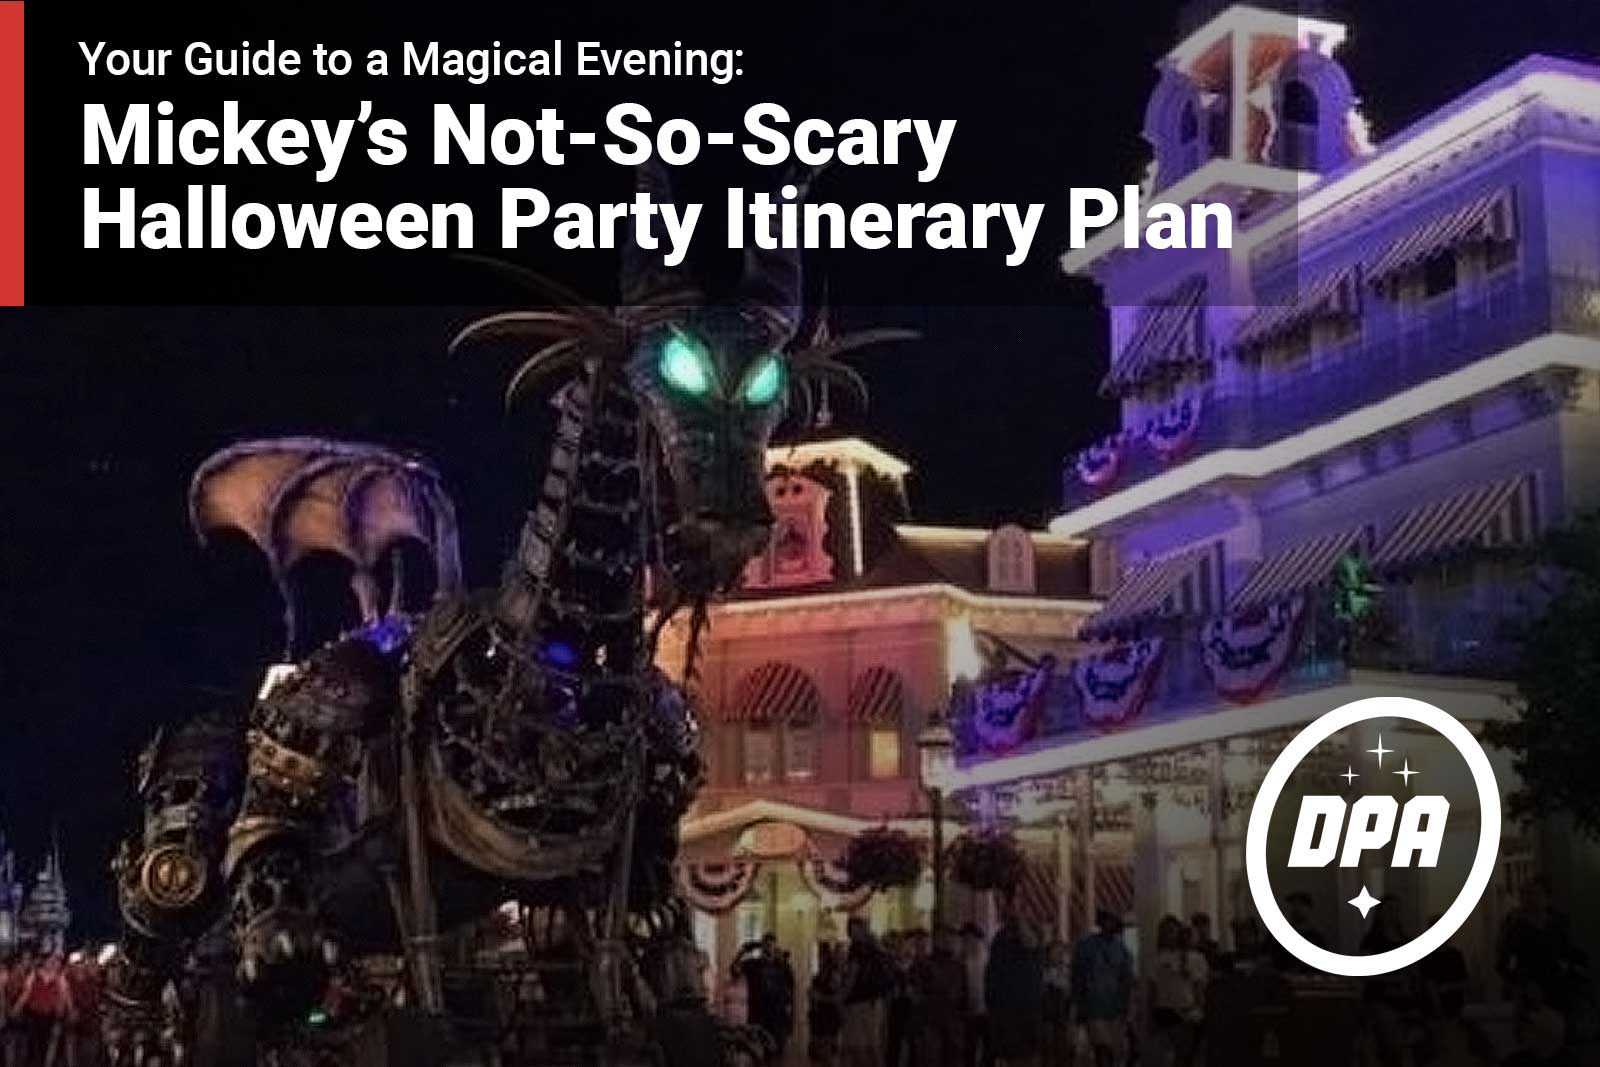 Mickey’s Not-So-Scary Halloween Party Itinerary Plan: Your Guide to a Magical Evening